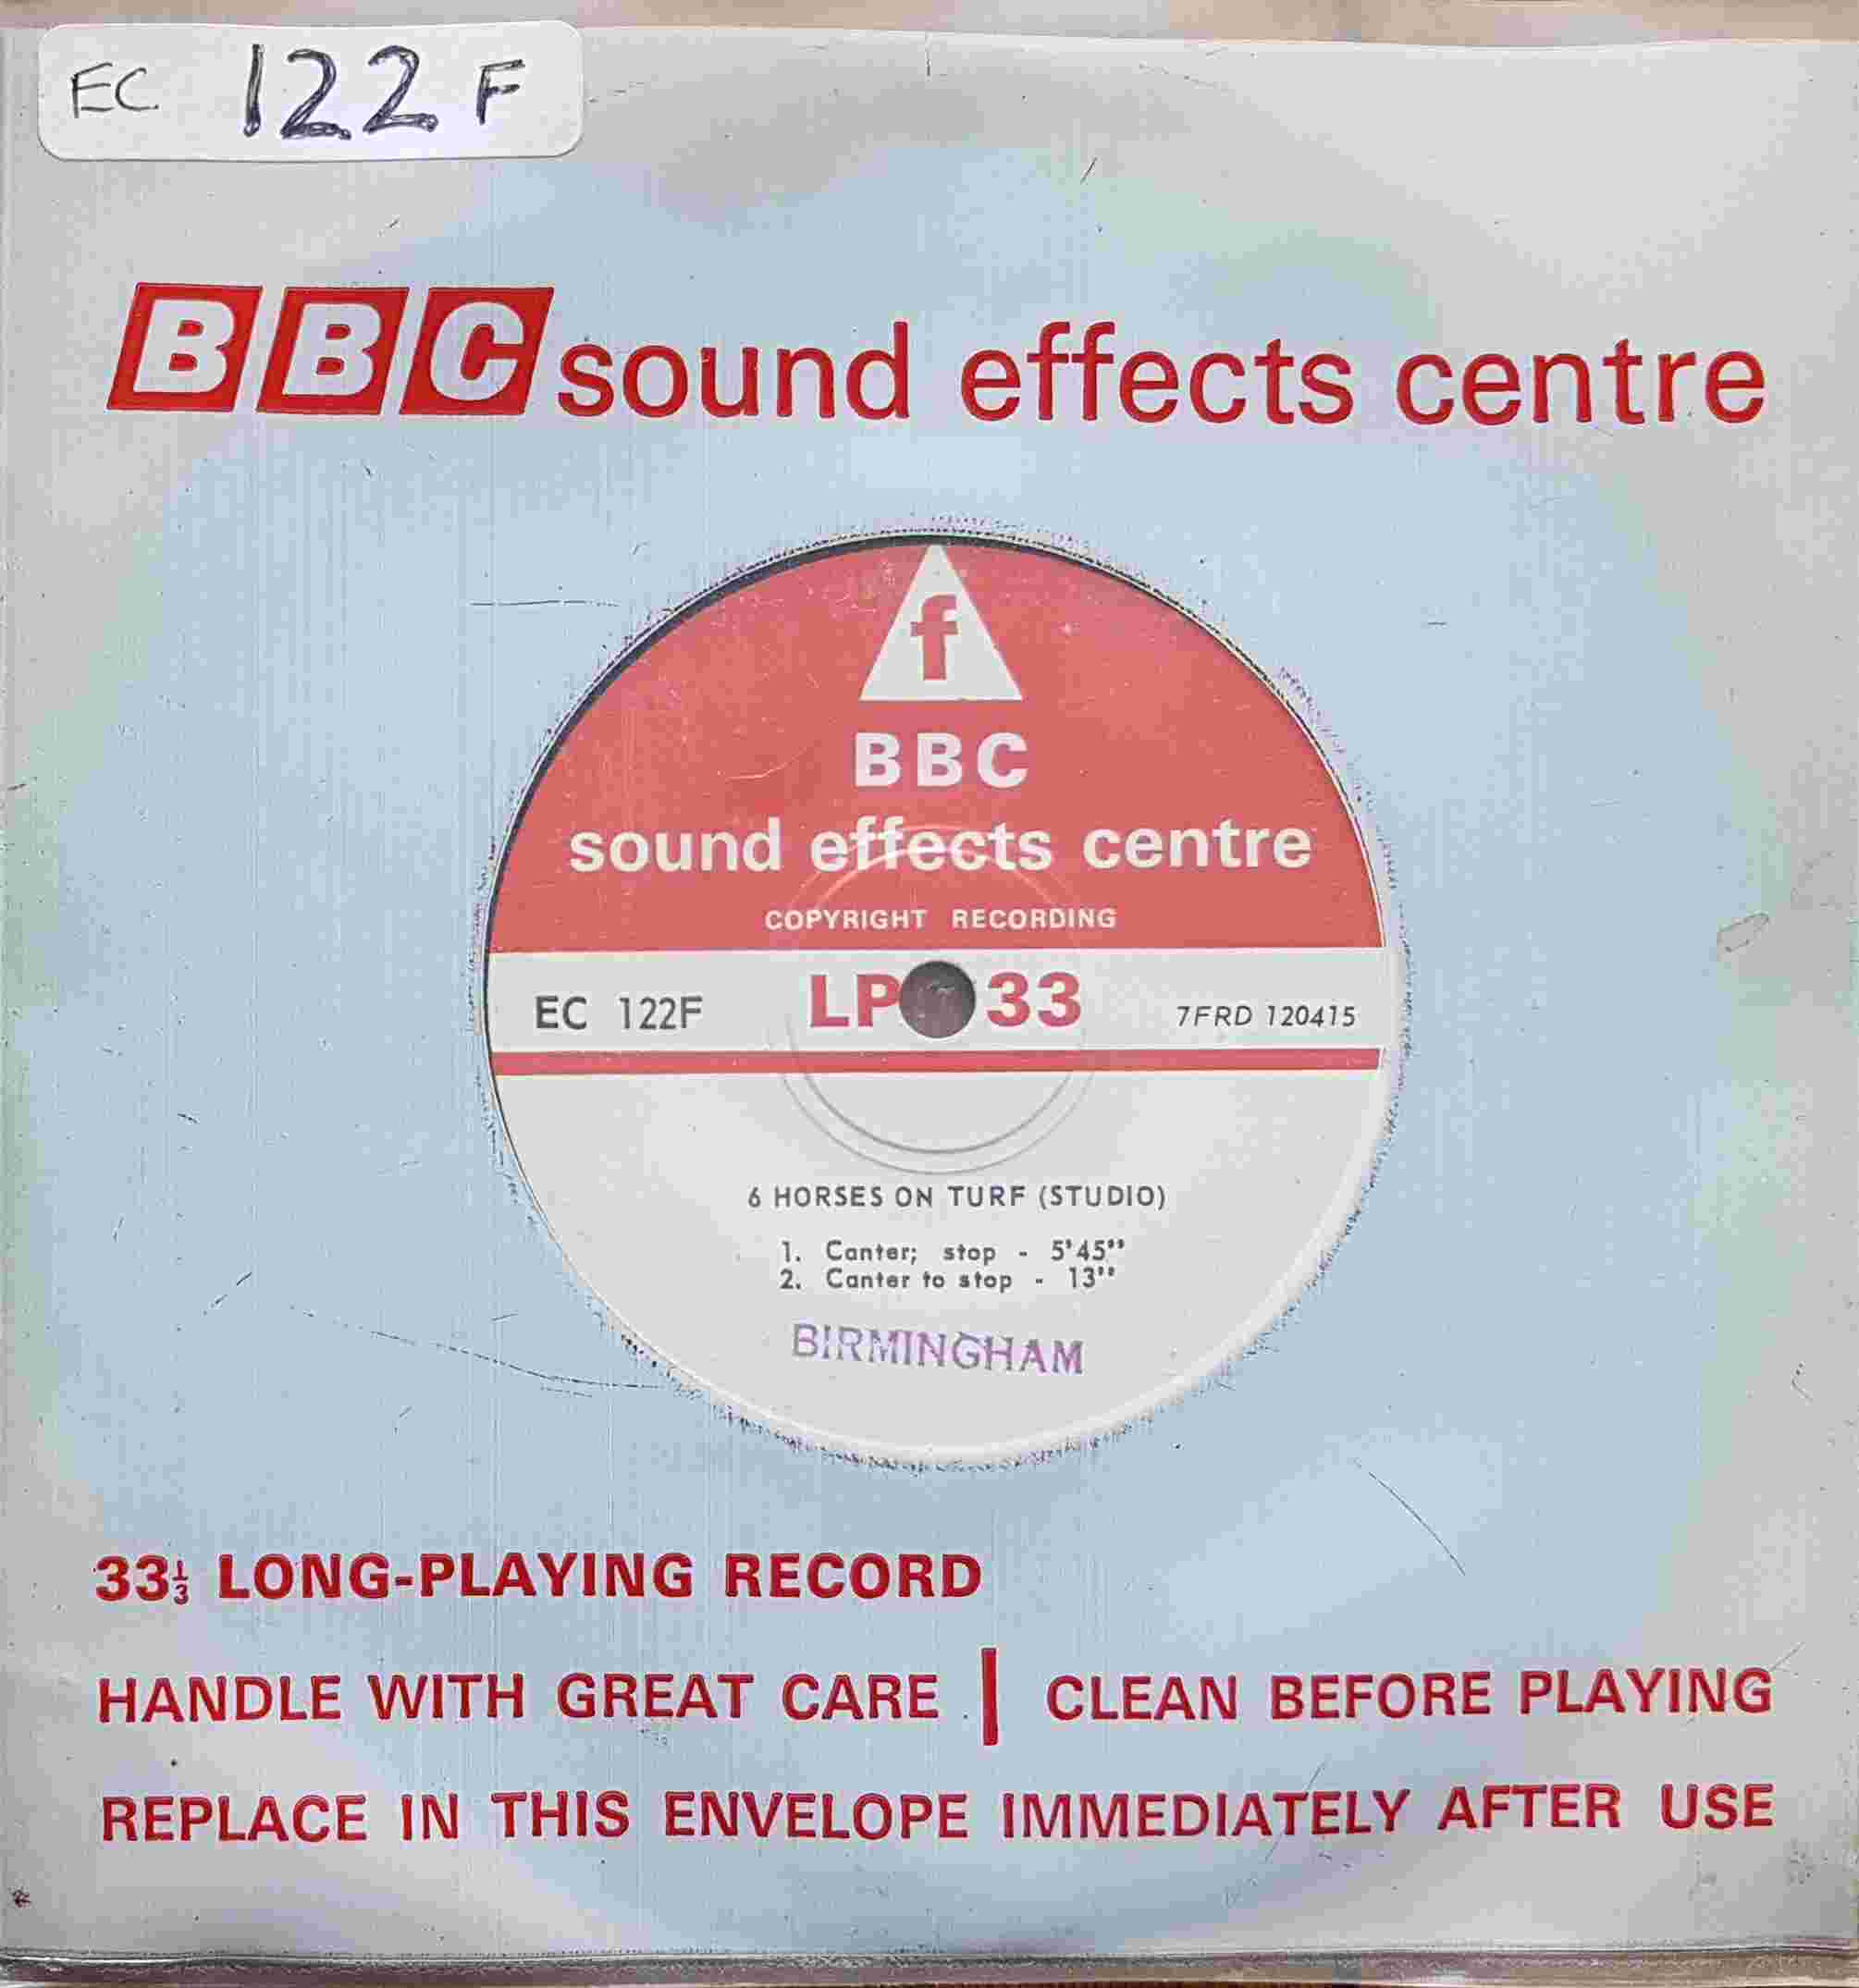 Picture of EC 122F 6 horses on turf (Studio) by artist Not registered from the BBC singles - Records and Tapes library